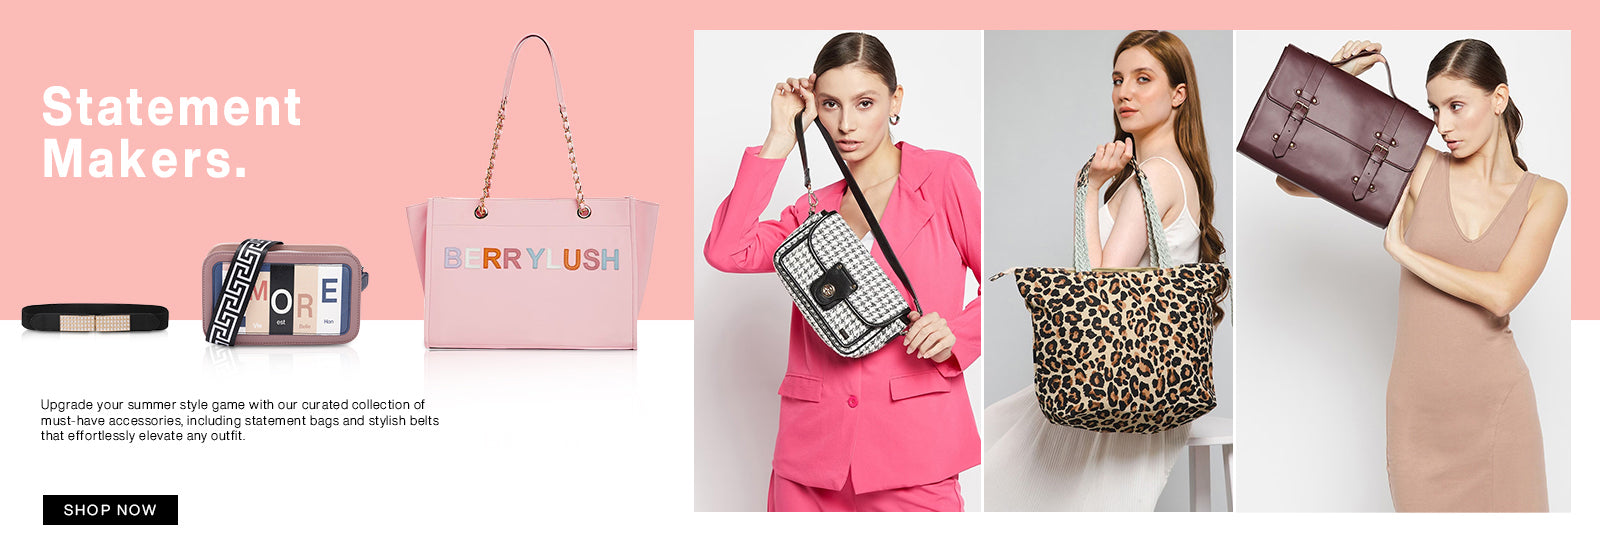 Berrylush Bags and Belts